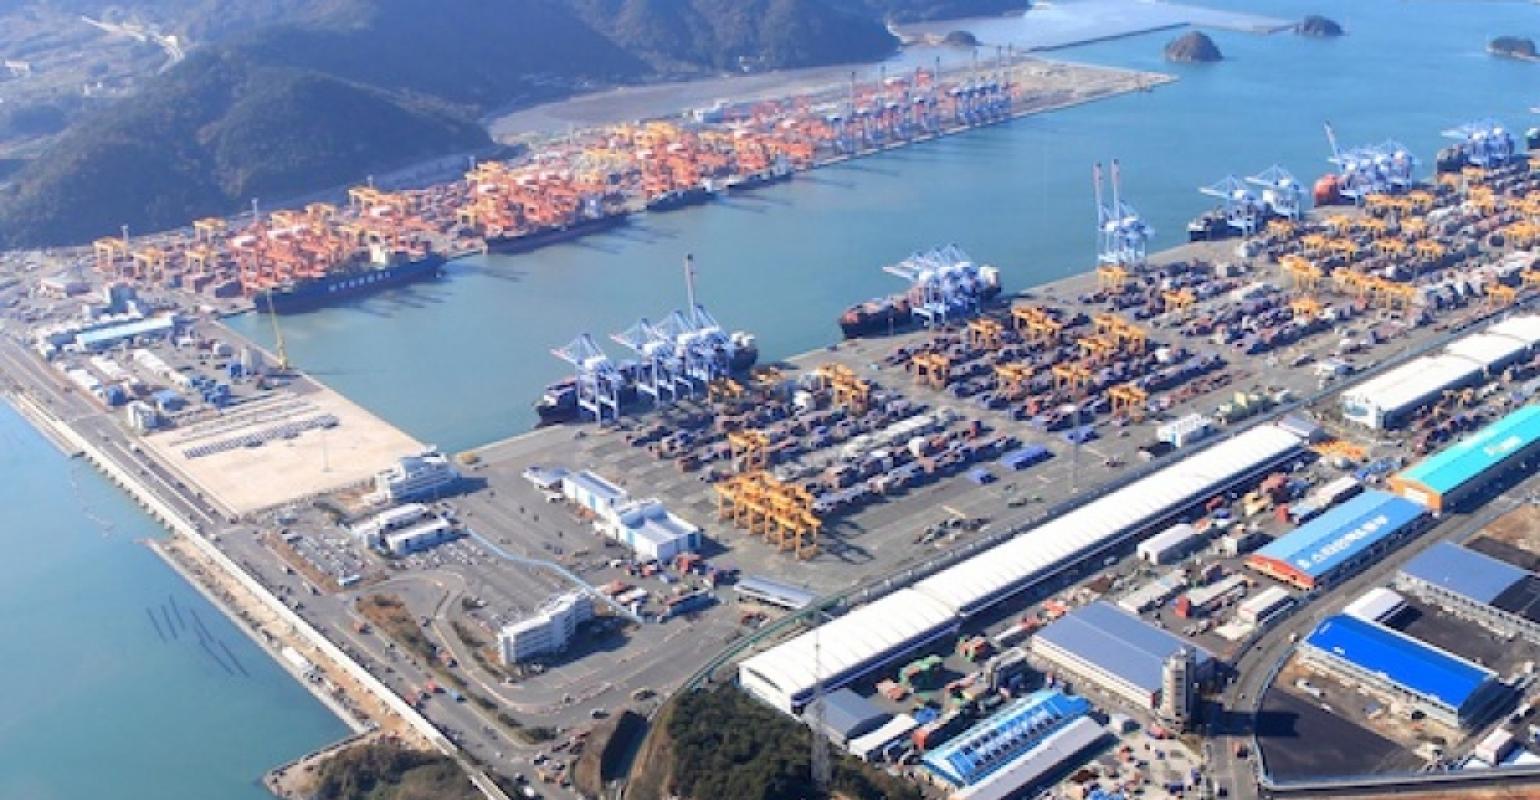 Busan Port Authority enhances protection due to COVID-19